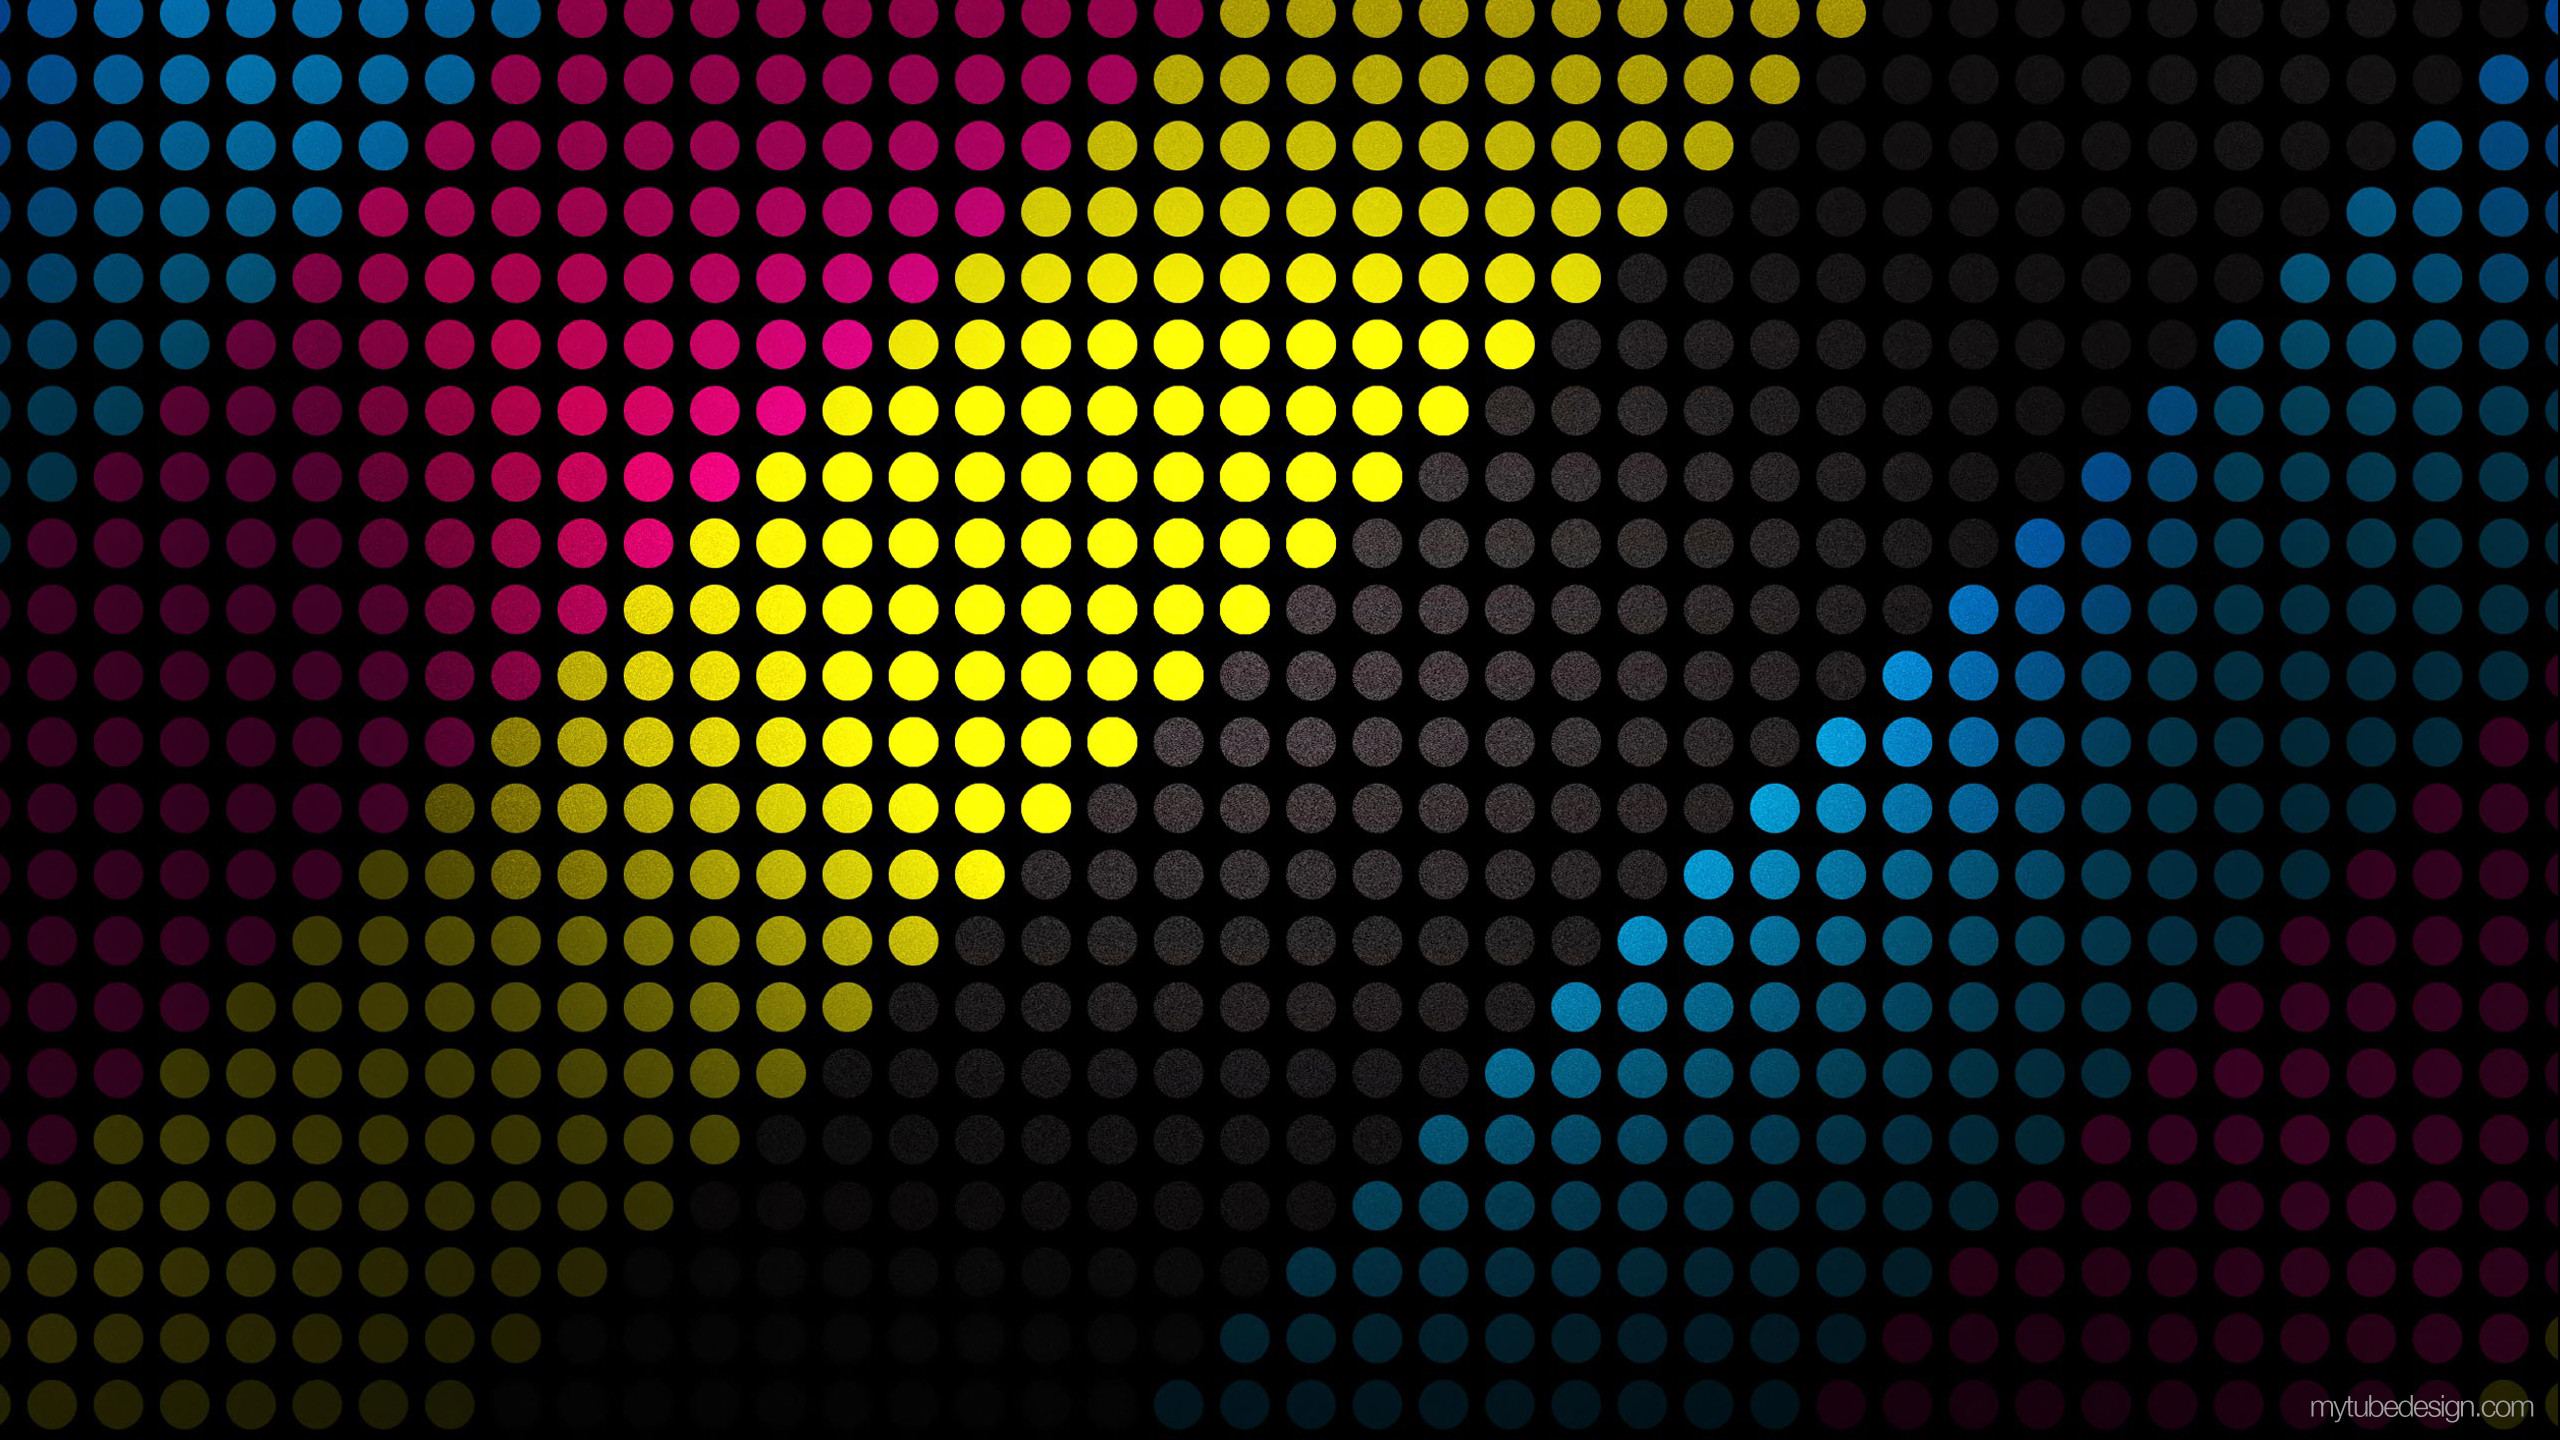 2560x1440 youtube wallpapers | WallpaperUP